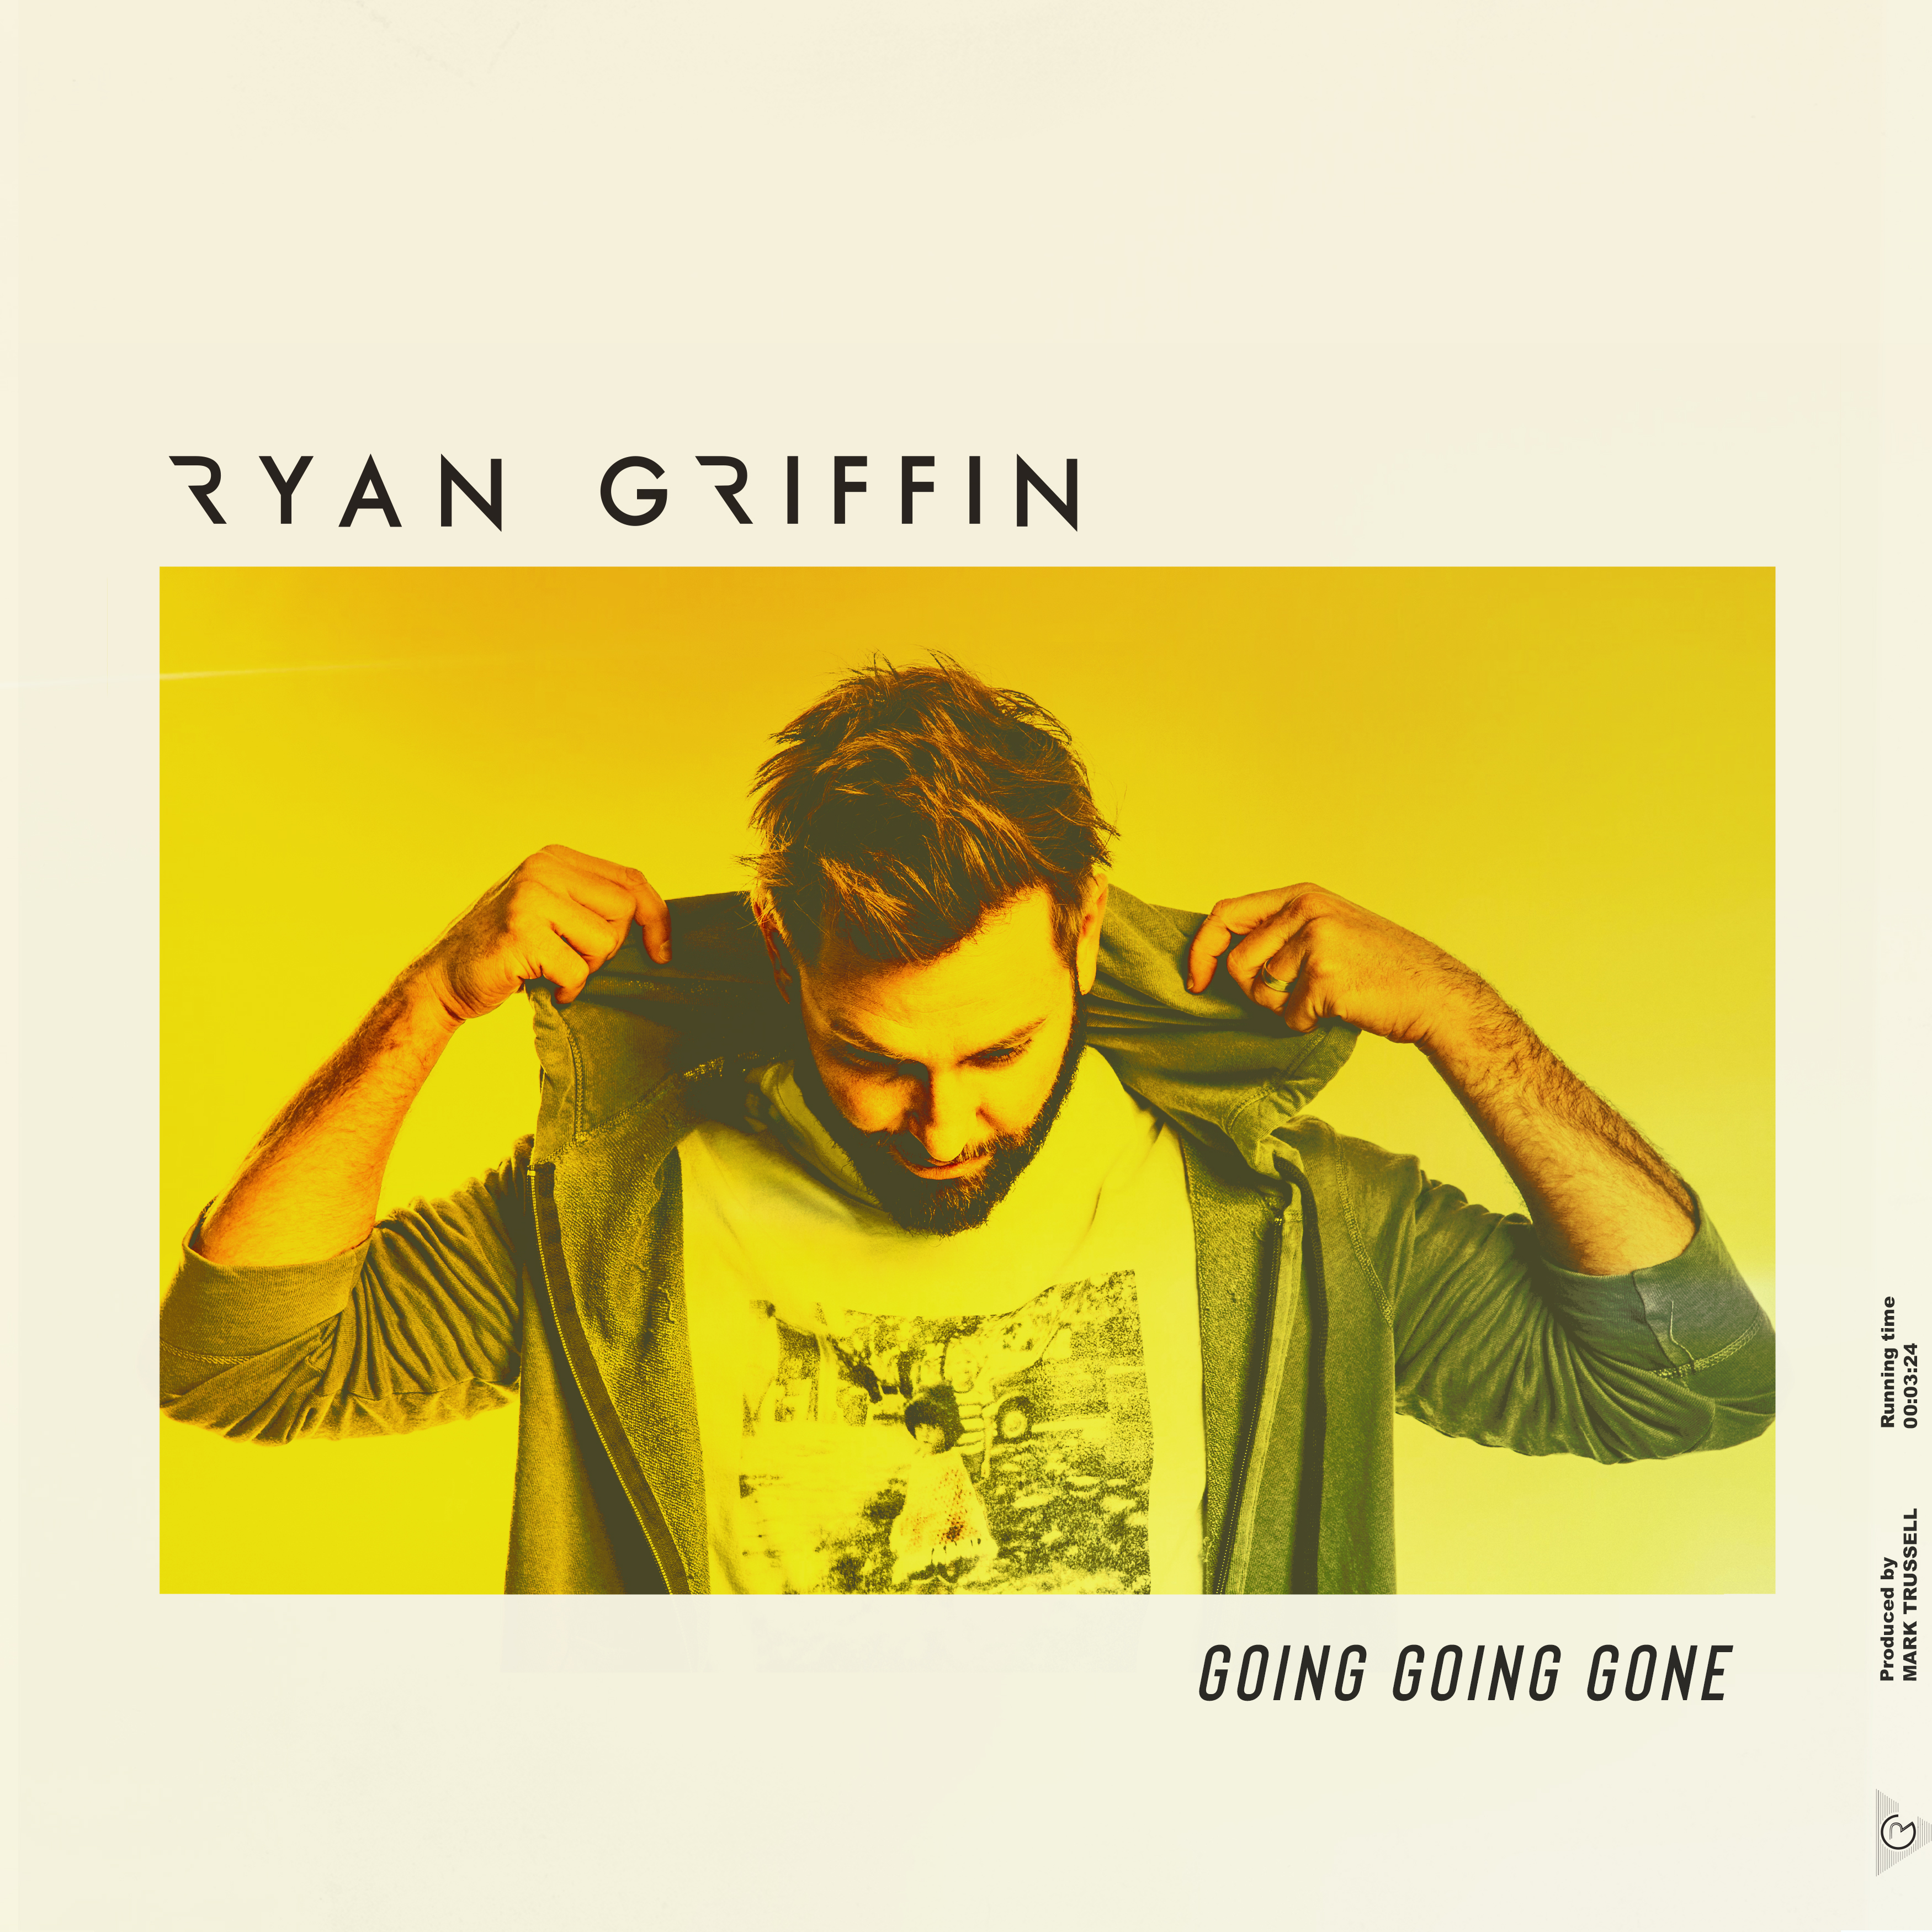 RYAN GRIFFIN KNOCKS IT OUT OF THE PARK WITH NEW SONG “GOING GOING GONE”